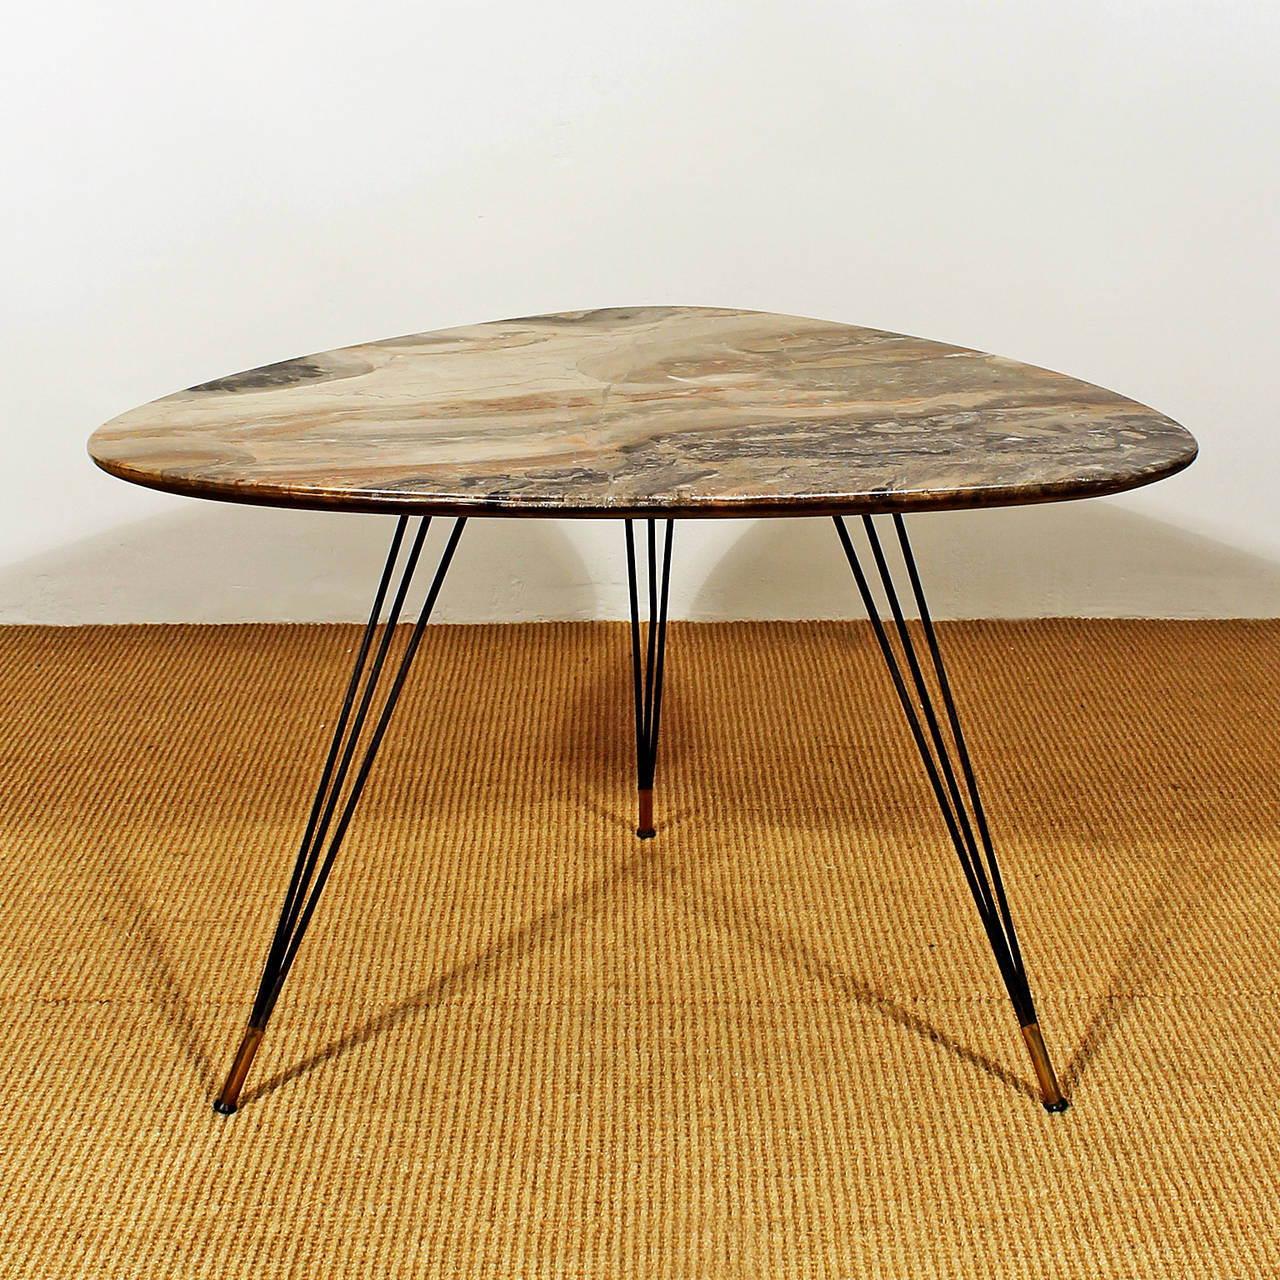 Tripod coffee table, triangular shape, black lacquered iron feet with polished brass at the bottom, spectacular marble on top.

Italy, circa 1950.